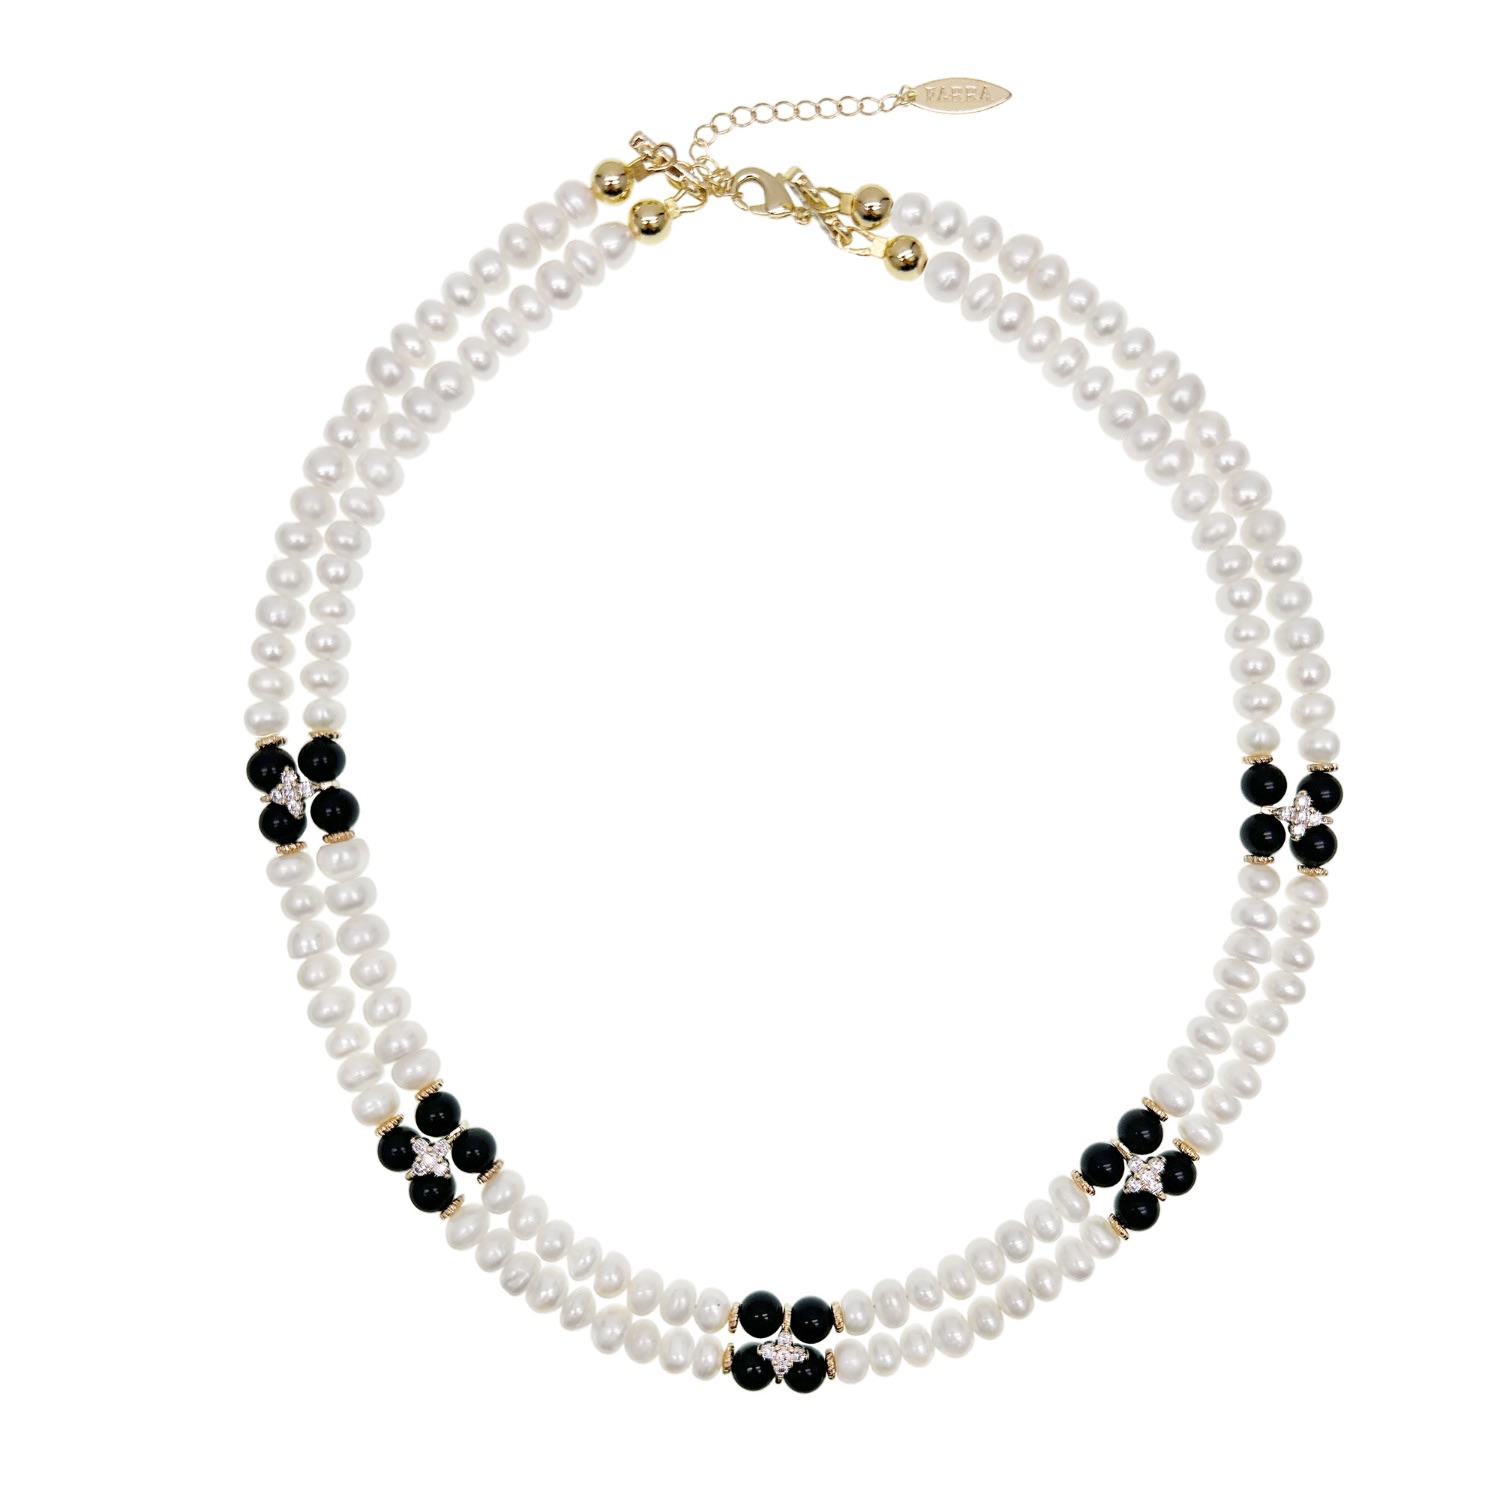 Farra Women's White Freshwater Pearls With Black Obsidian And Zircon Stone Statement Collar Necklace In Red